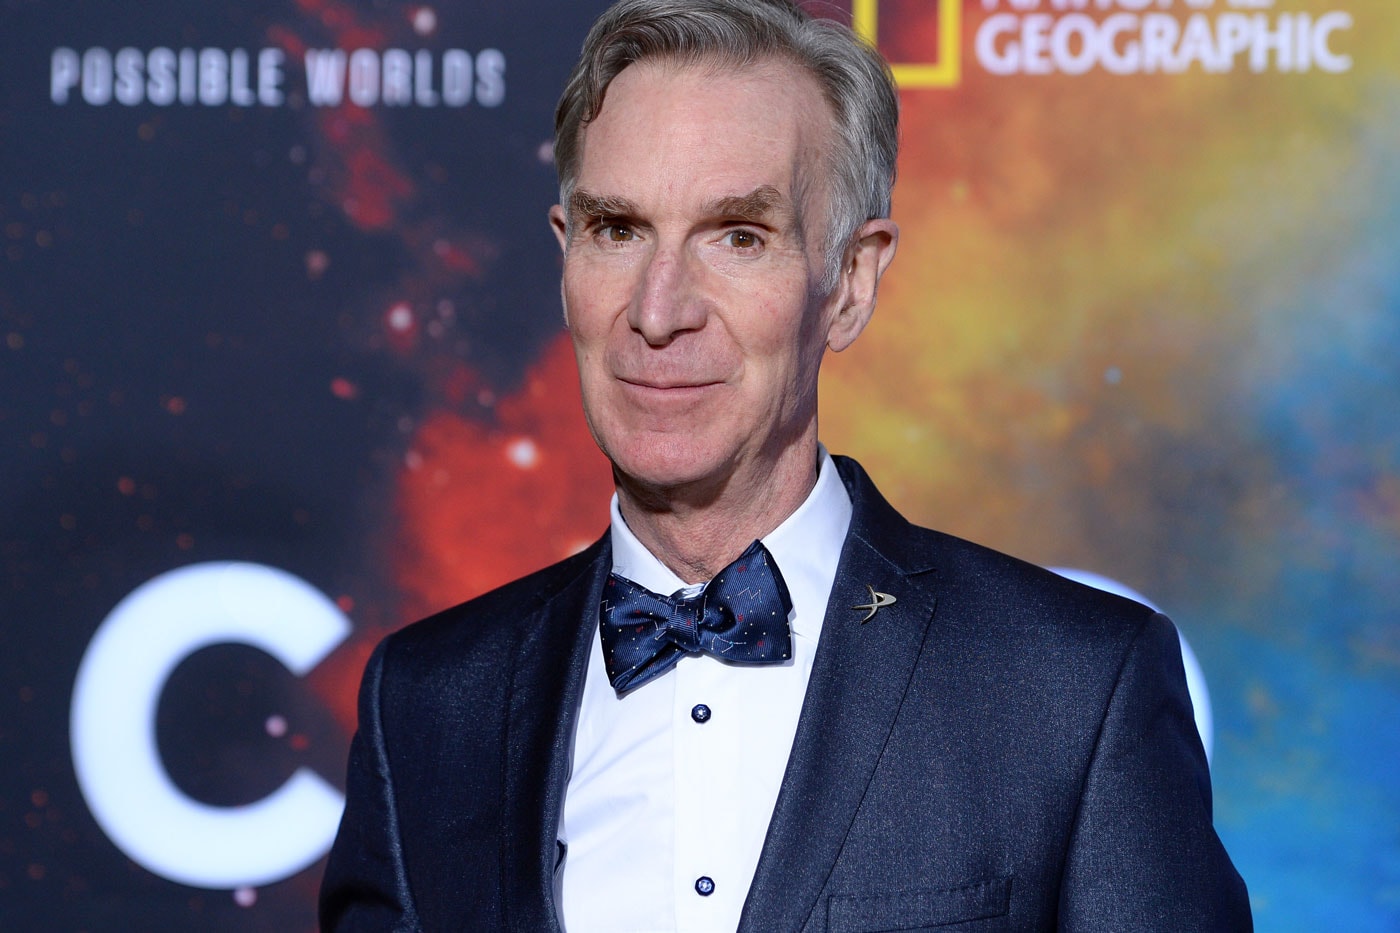 Bill Nye Returns With The End is Nye TV Series peacock nbcuniversal august 25 premiere six episode series how science save disaster seth macfarlane brannon braga date info